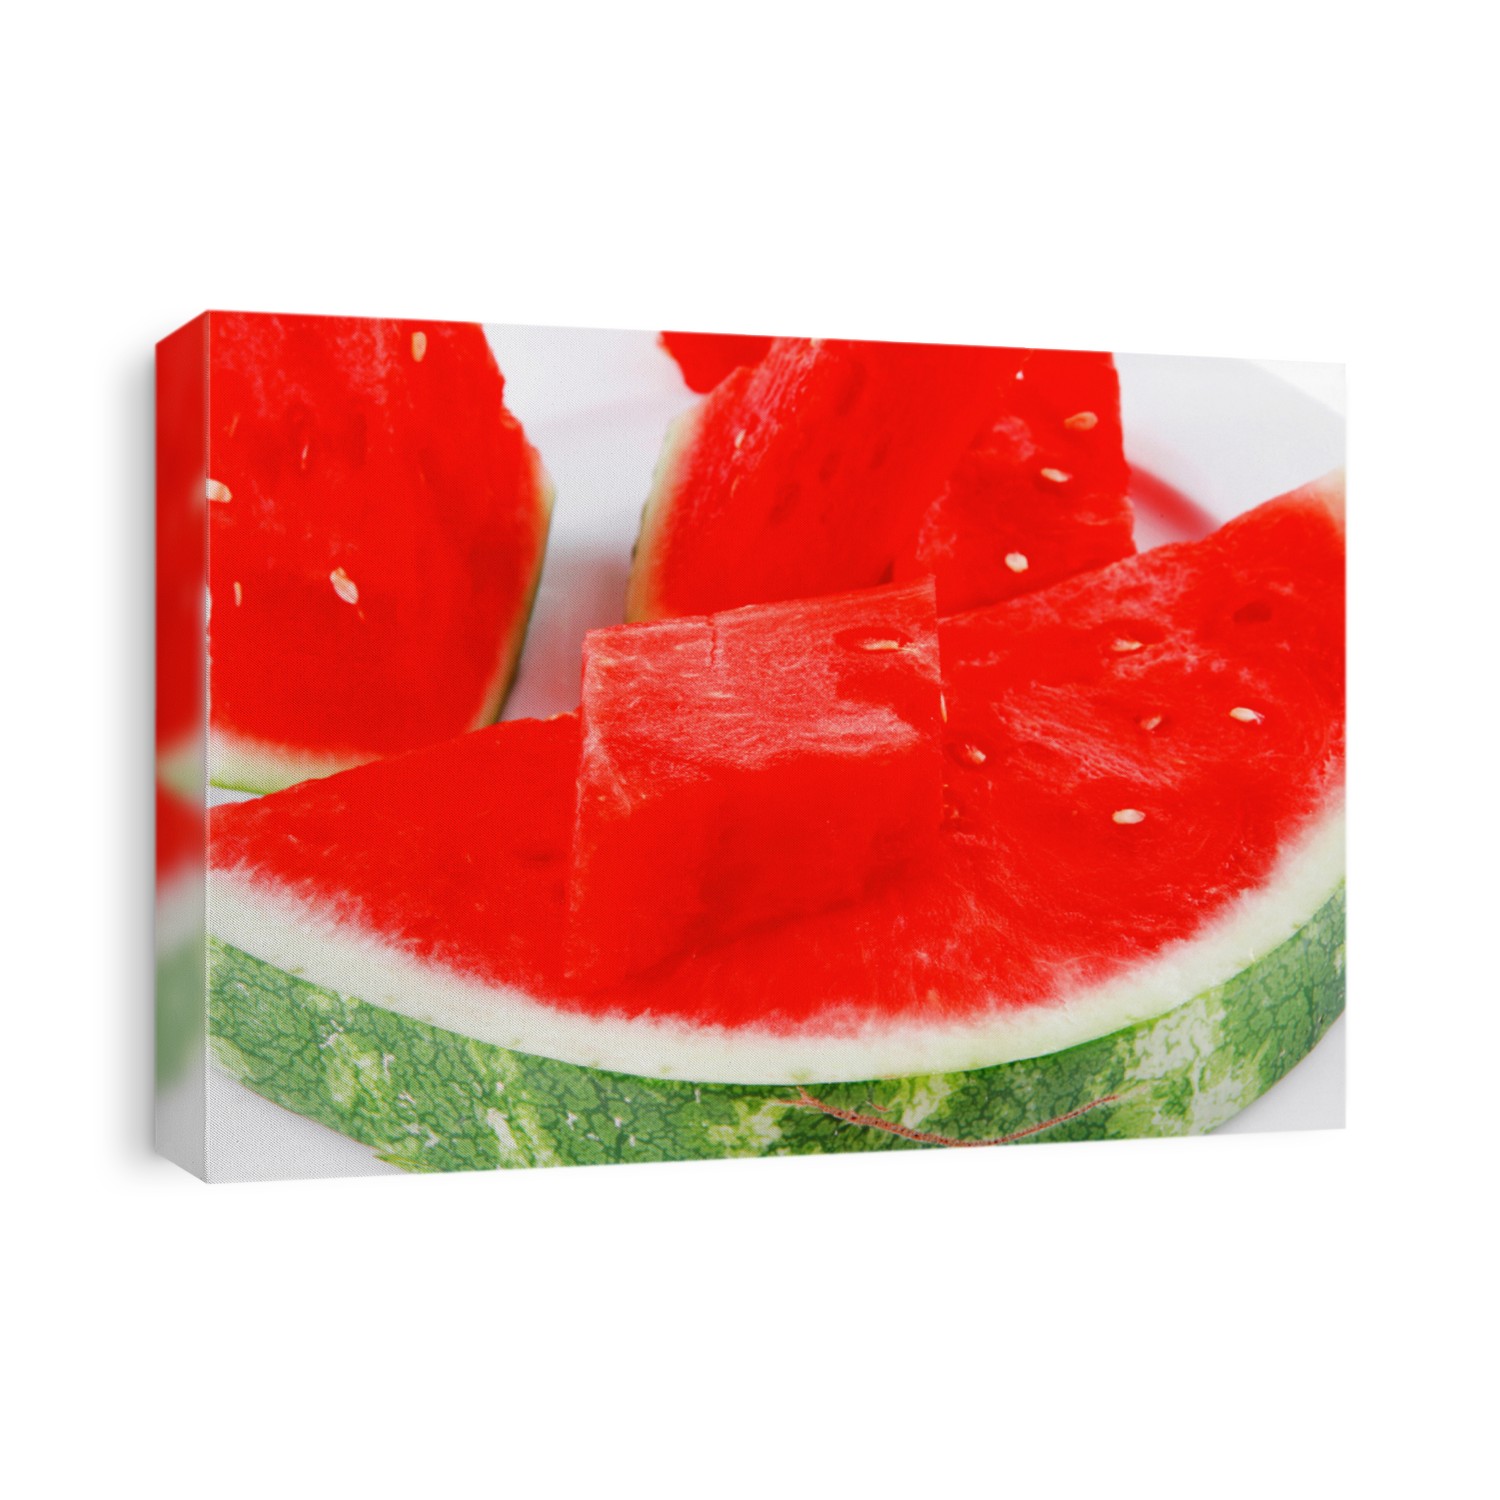 red raw watermelon pieces on white plate